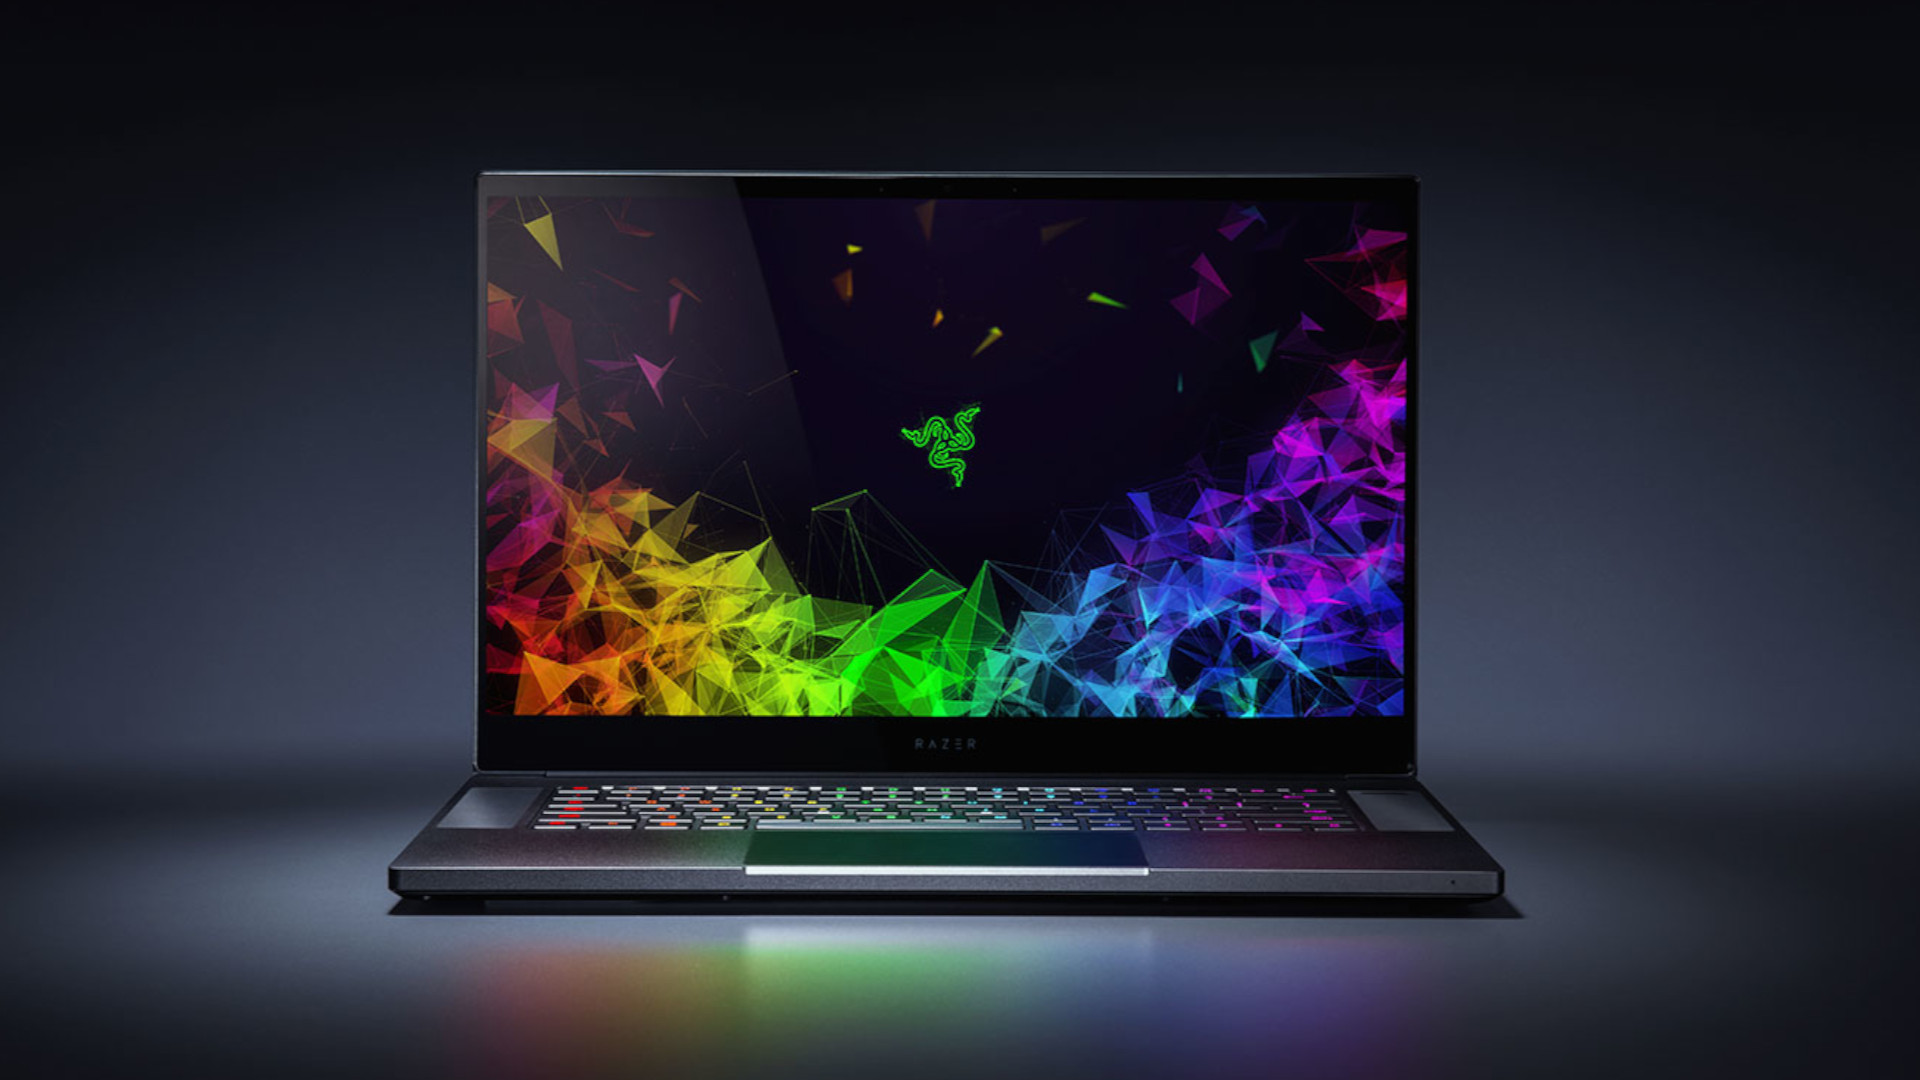 Razer warns that gaming laptops are next to suffer price hikes, following GPUs